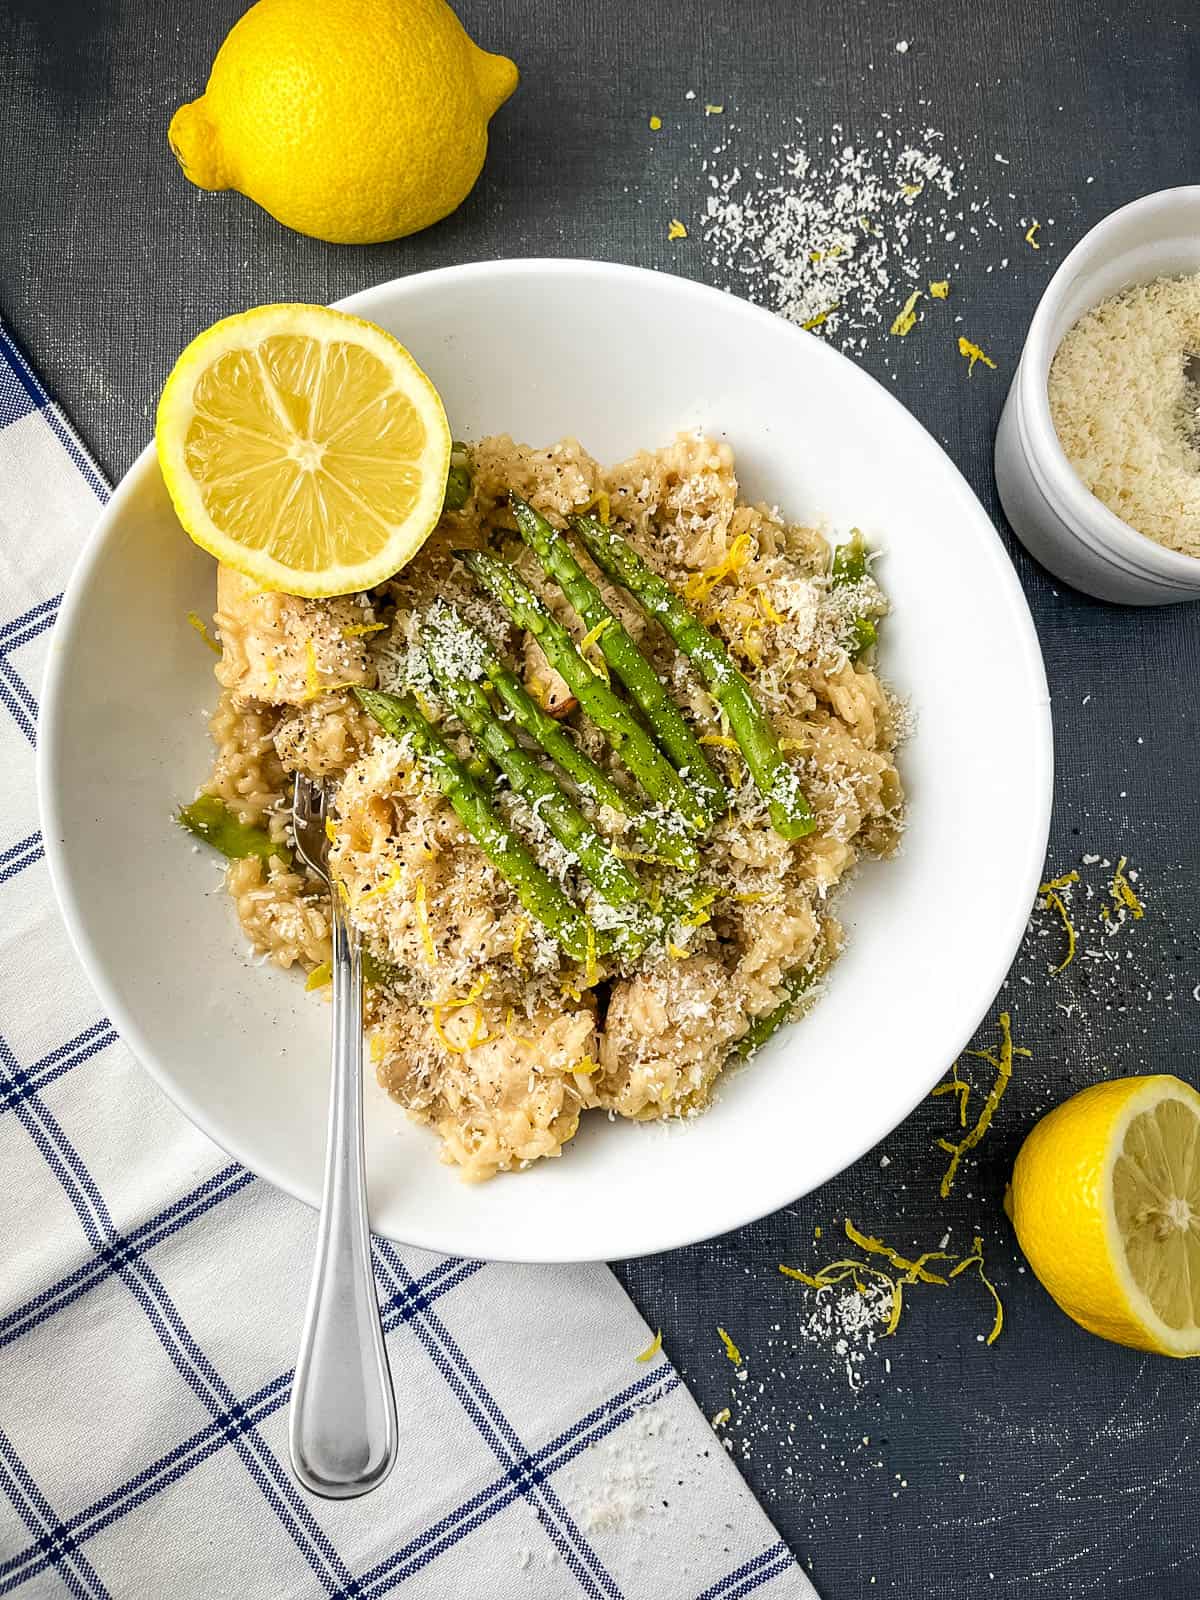 asparagus and chicken risotto served with lemon in a bowl.